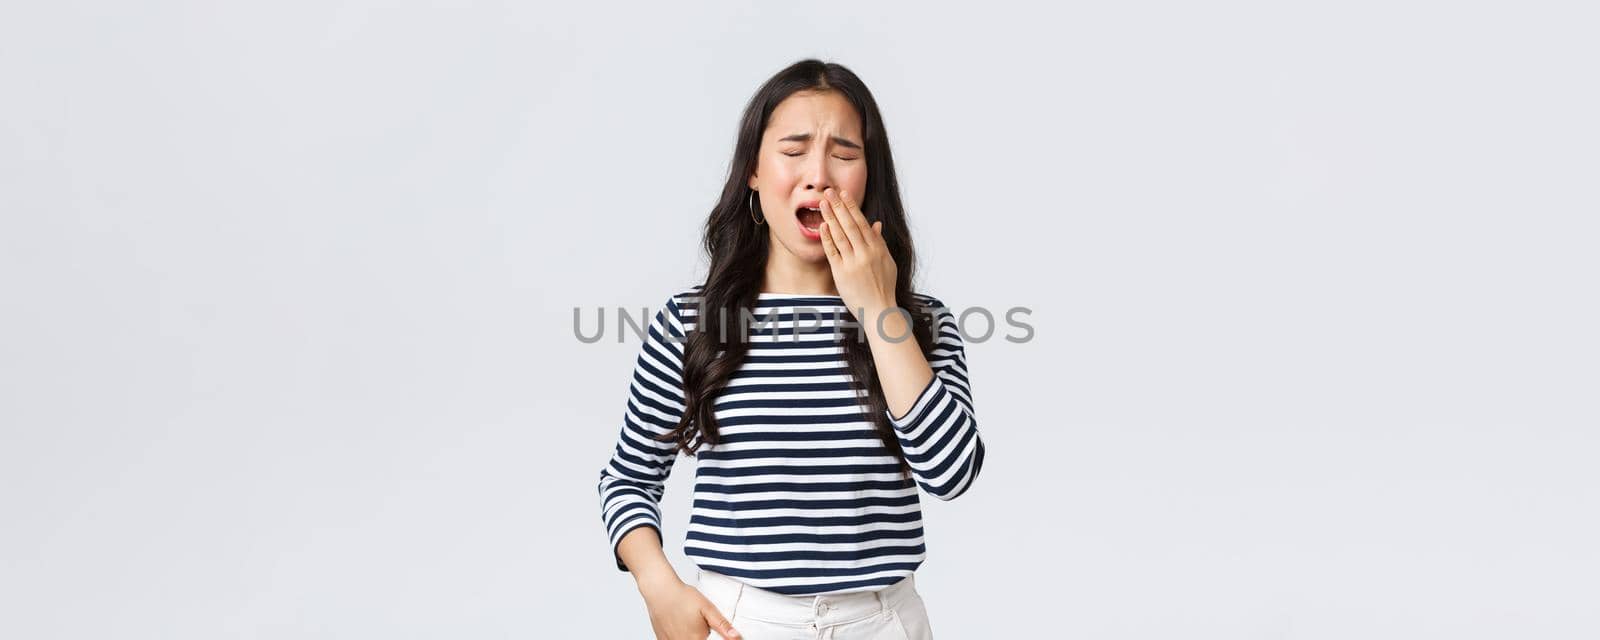 Lifestyle, people emotions and casual concept. Sleepy tired woman working late in office, close eyes and yawning, want go bad. Asian girl woke up early, need coffee, stand white background.